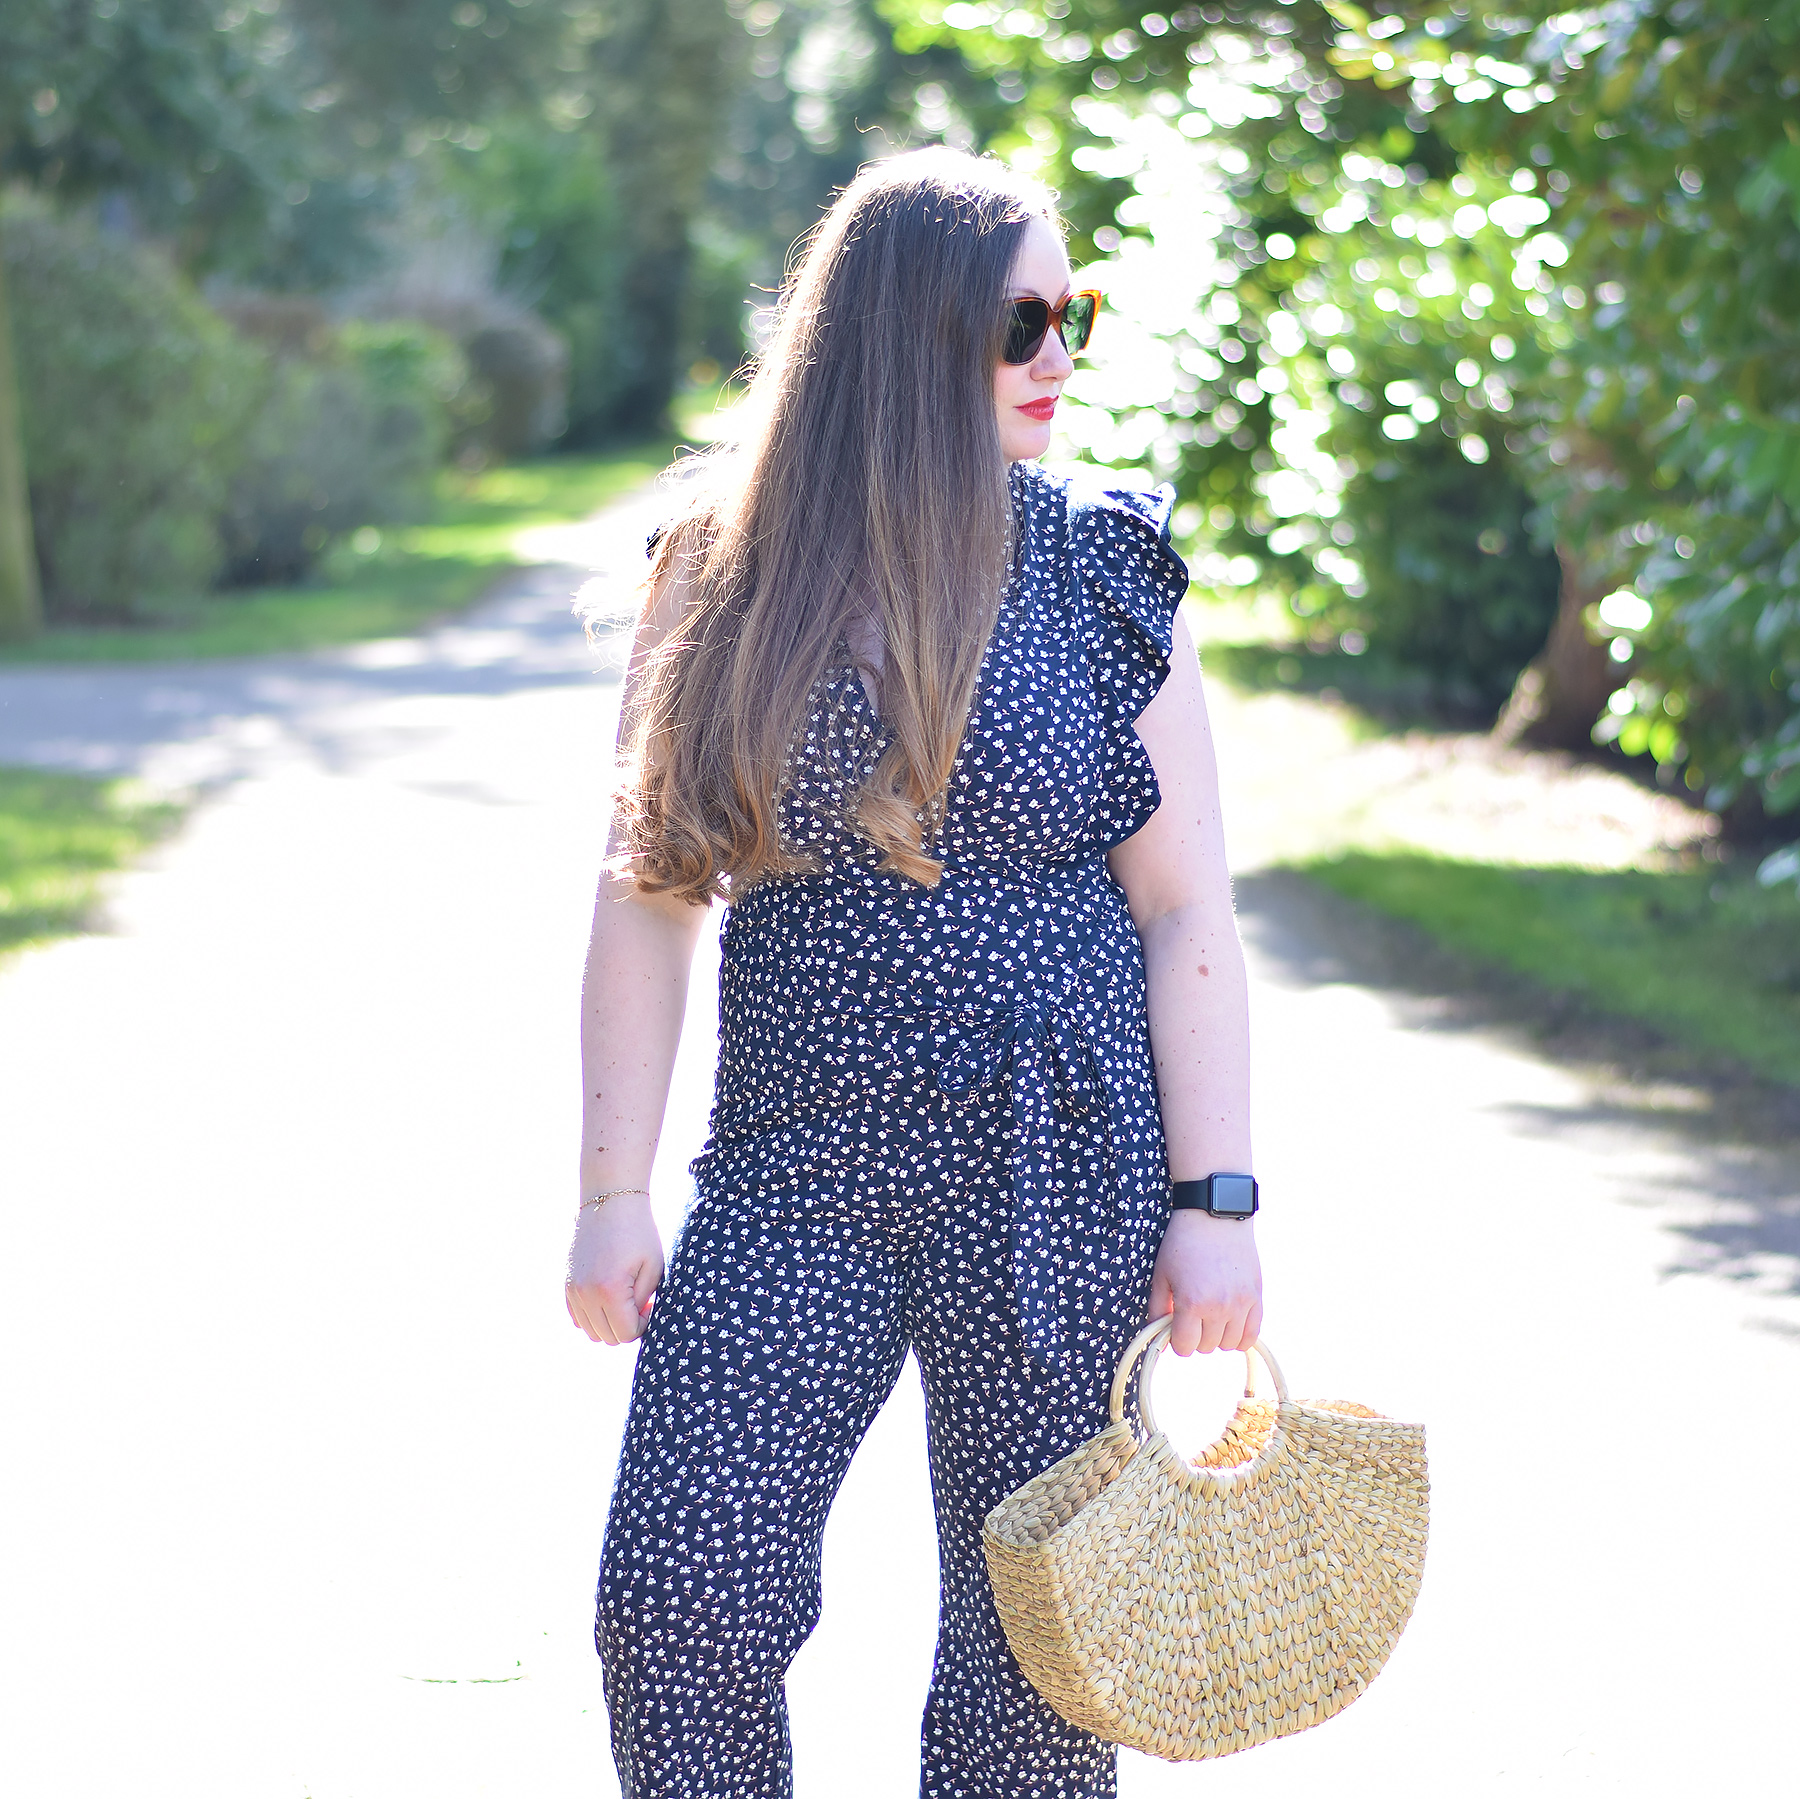 Floral jumpsuit and zara basket bag with round handles